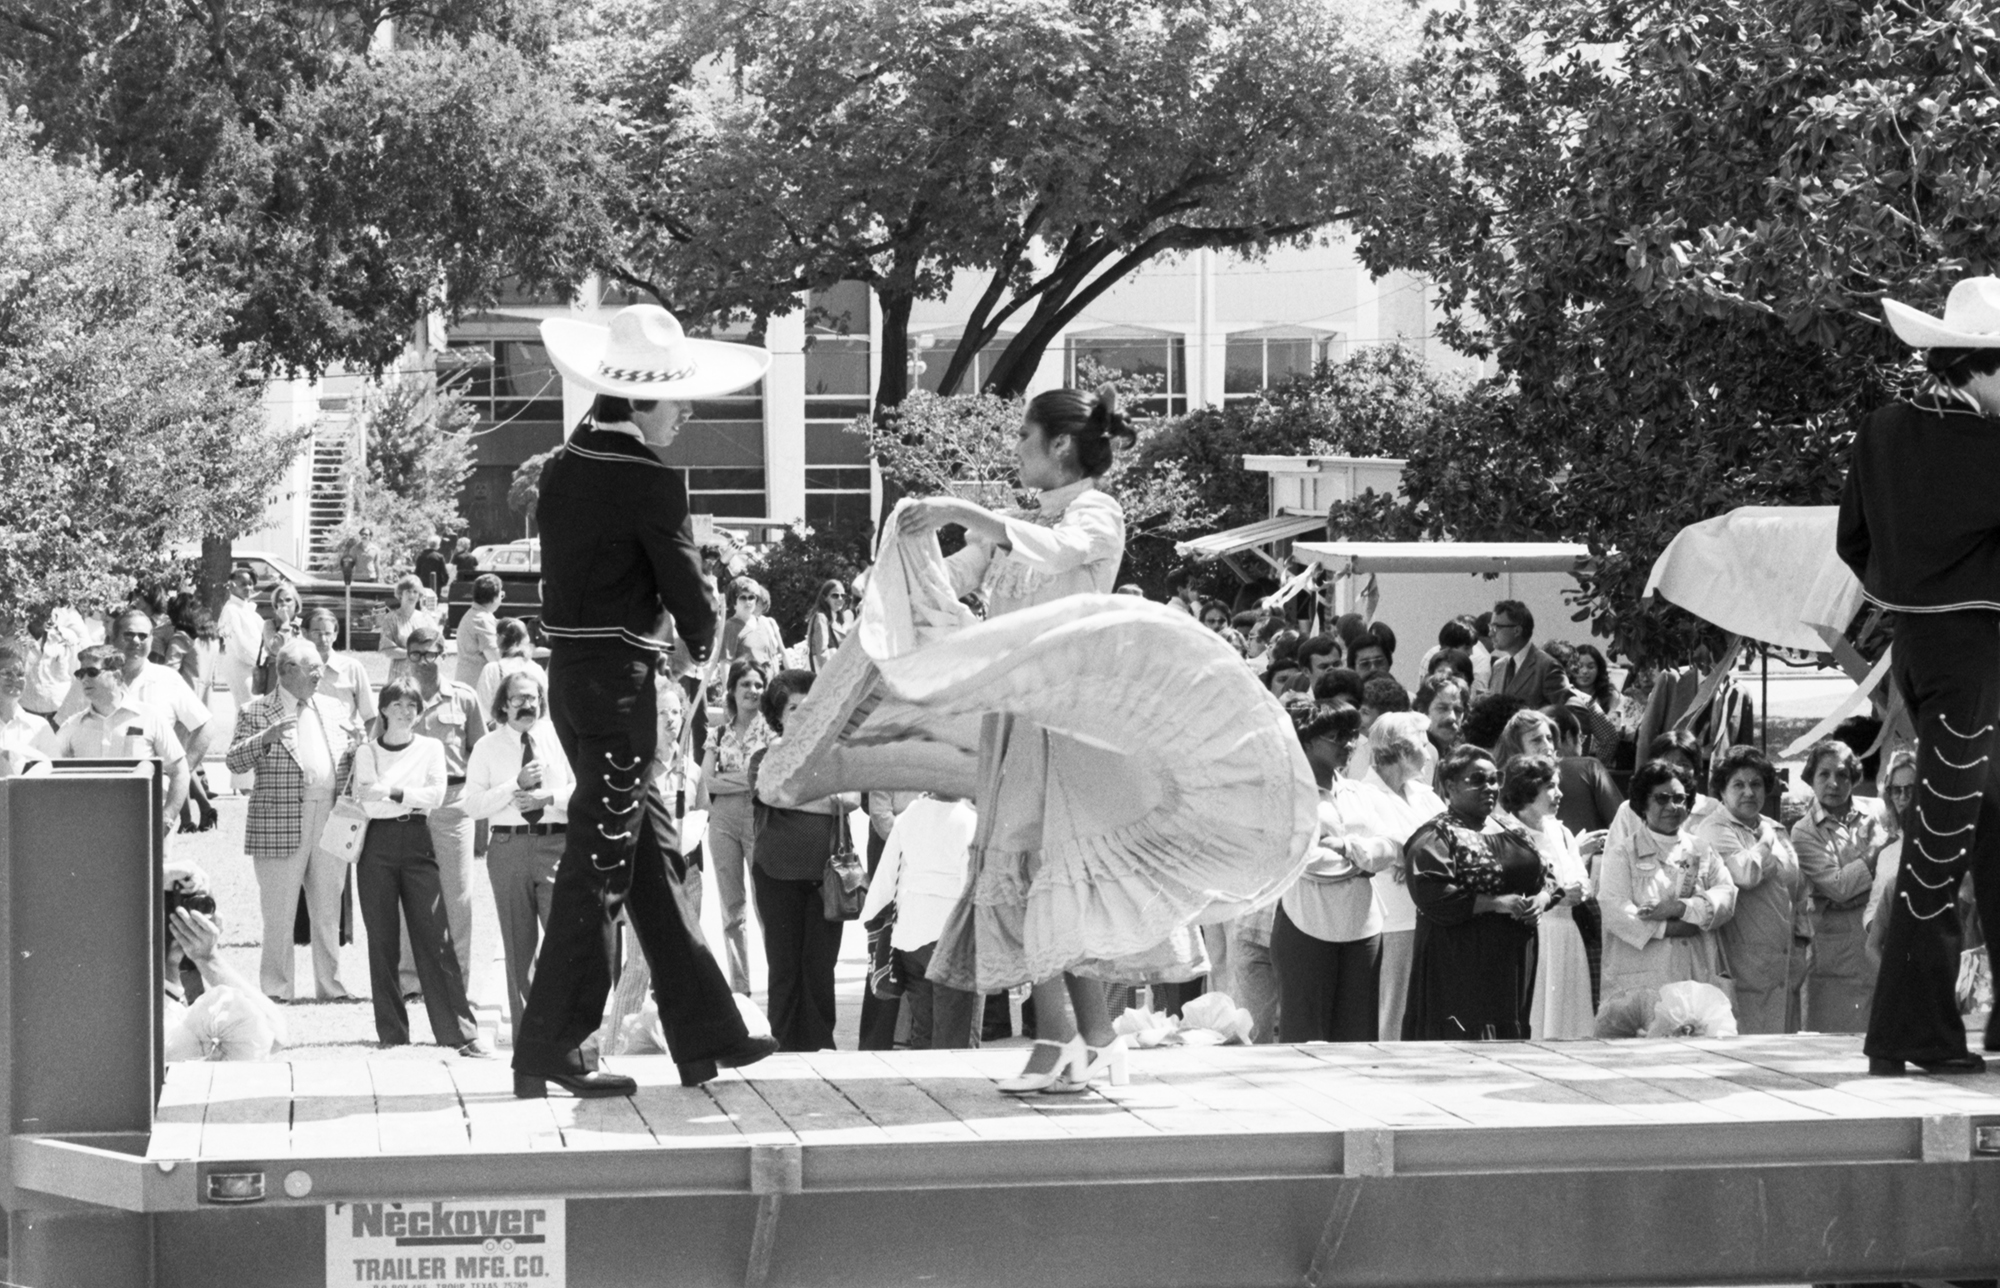 Black and white photo of a traditional Mexican folklorico dancer performance on a stage.